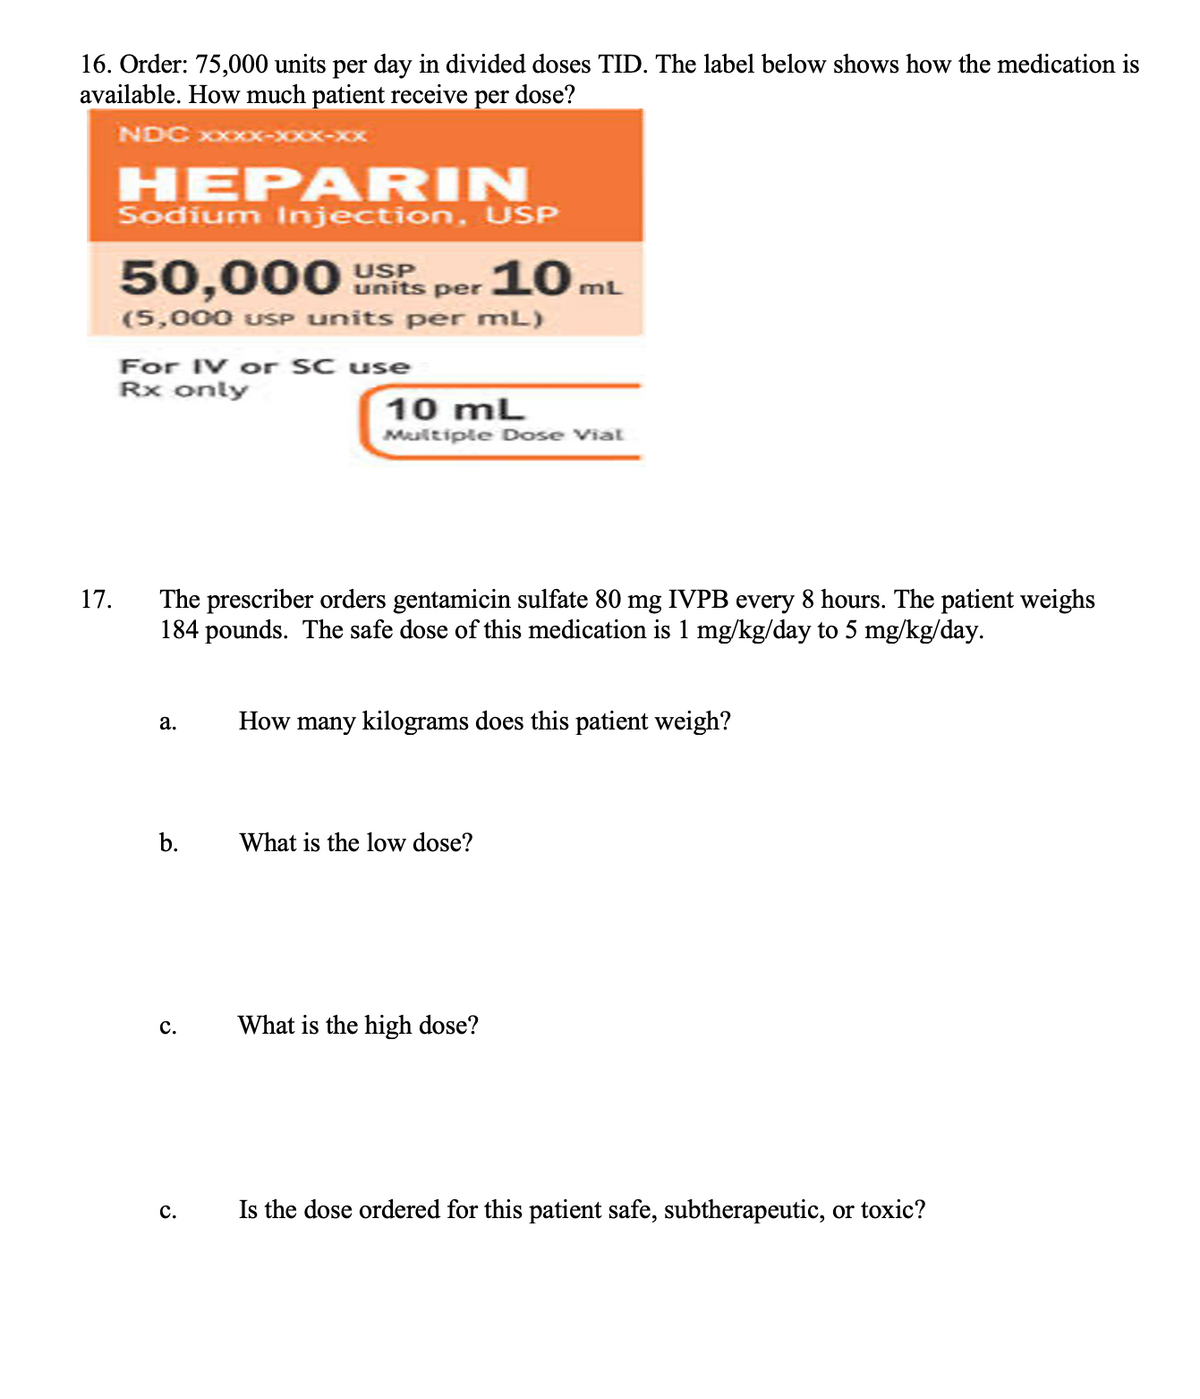 16. Order: 75,000 units per day in divided doses TID. The label below shows how the medication is
available. How much patient receive per dose?
NDC xxxxX
17.
HEPARIN
Sodium Injection, USP
50,000 USP
units per
(5,000 USP units per mL)
For IV or SC use
Rx only
a.
The prescriber orders gentamicin sulfate 80 mg IVPB every 8 hours. The patient weighs
184 pounds. The safe dose of this medication is 1 mg/kg/day to 5 mg/kg/day.
b.
C.
C.
10mL
10 mL
Multiple Dose Vial
How many kilograms does this patient weigh?
What is the low dose?
What is the high dose?
Is the dose ordered for this patient safe, subtherapeutic, or toxic?